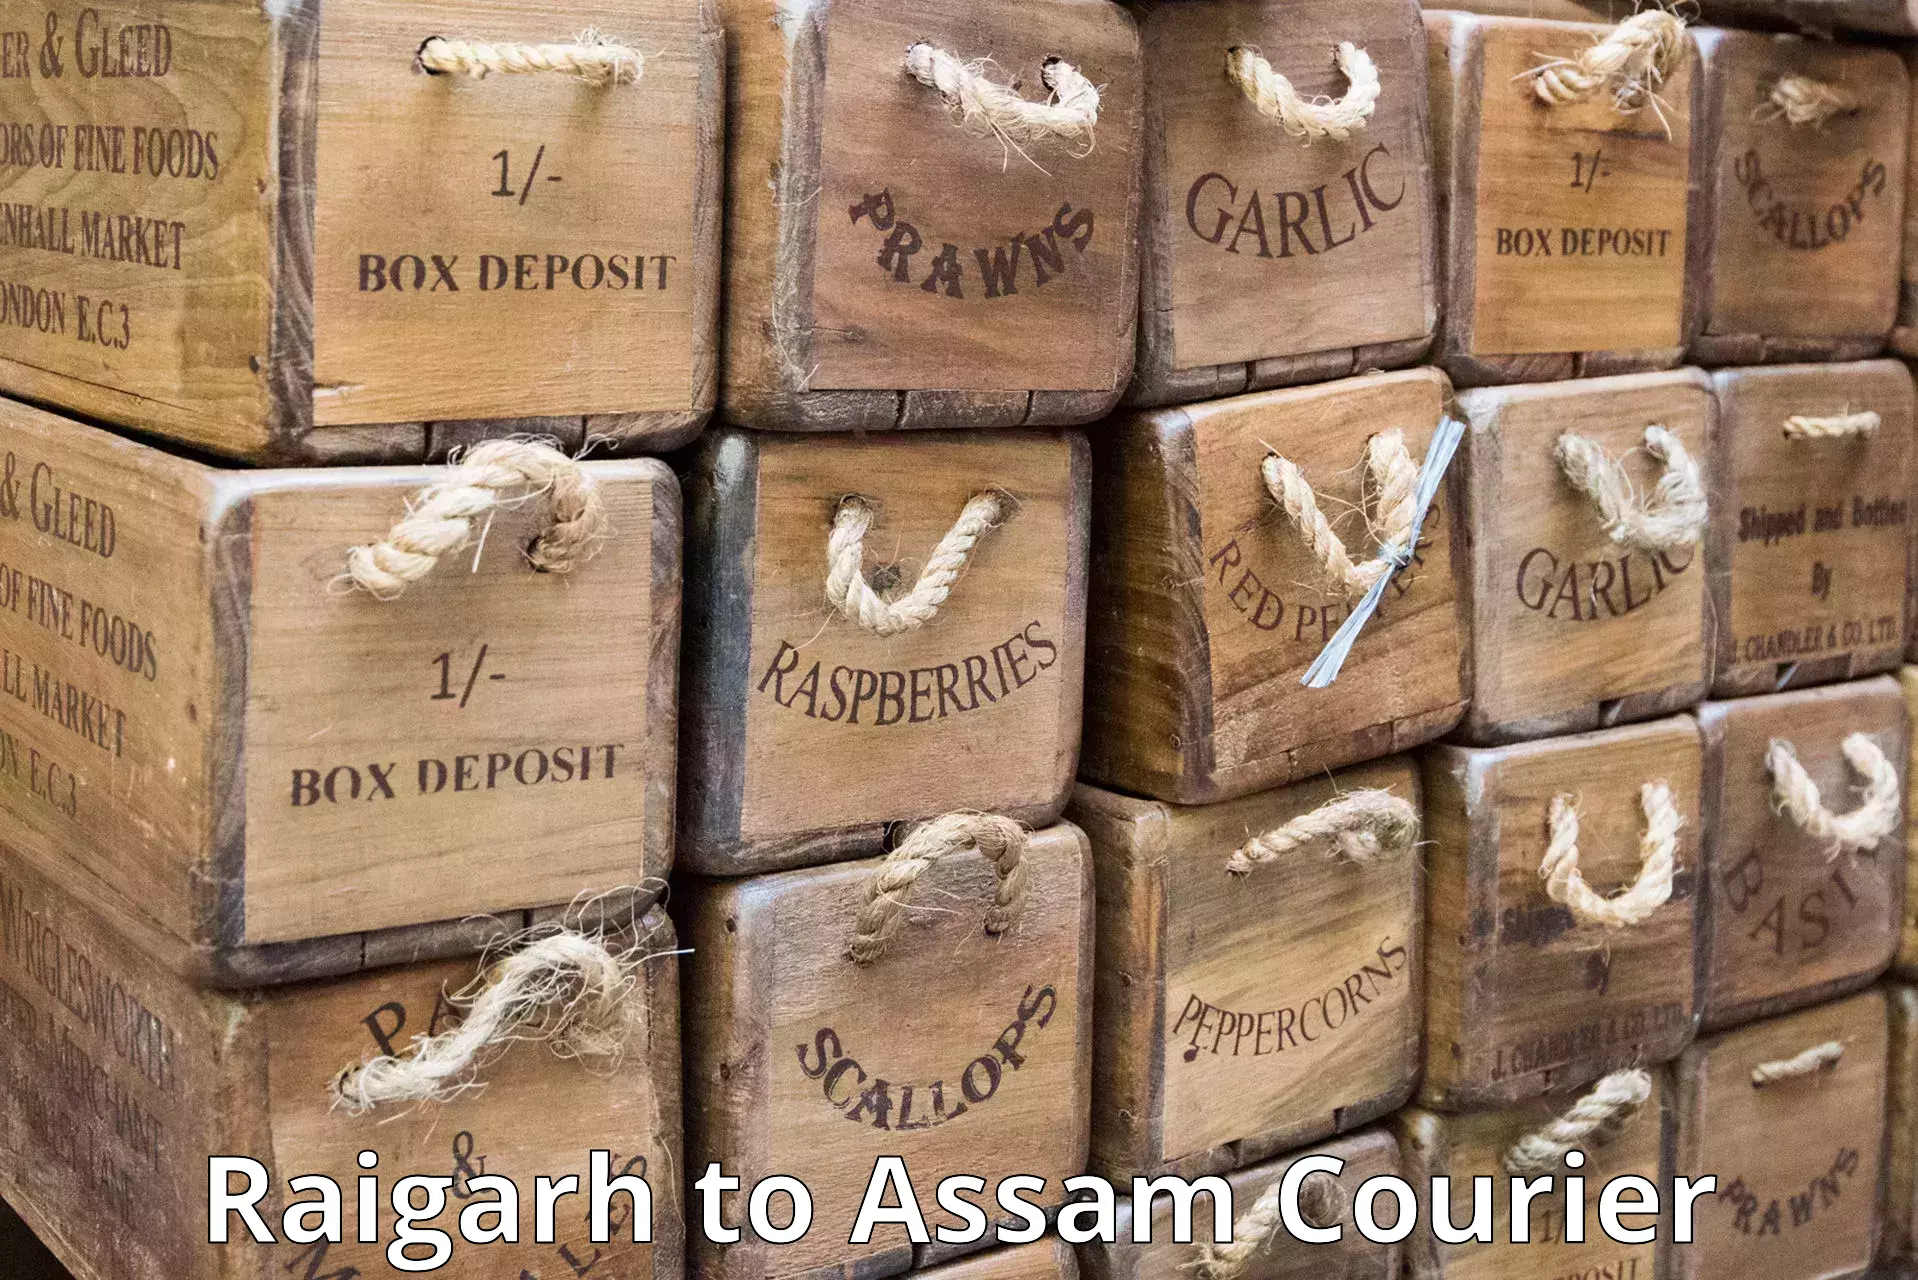 Express delivery capabilities Raigarh to Dibrugarh